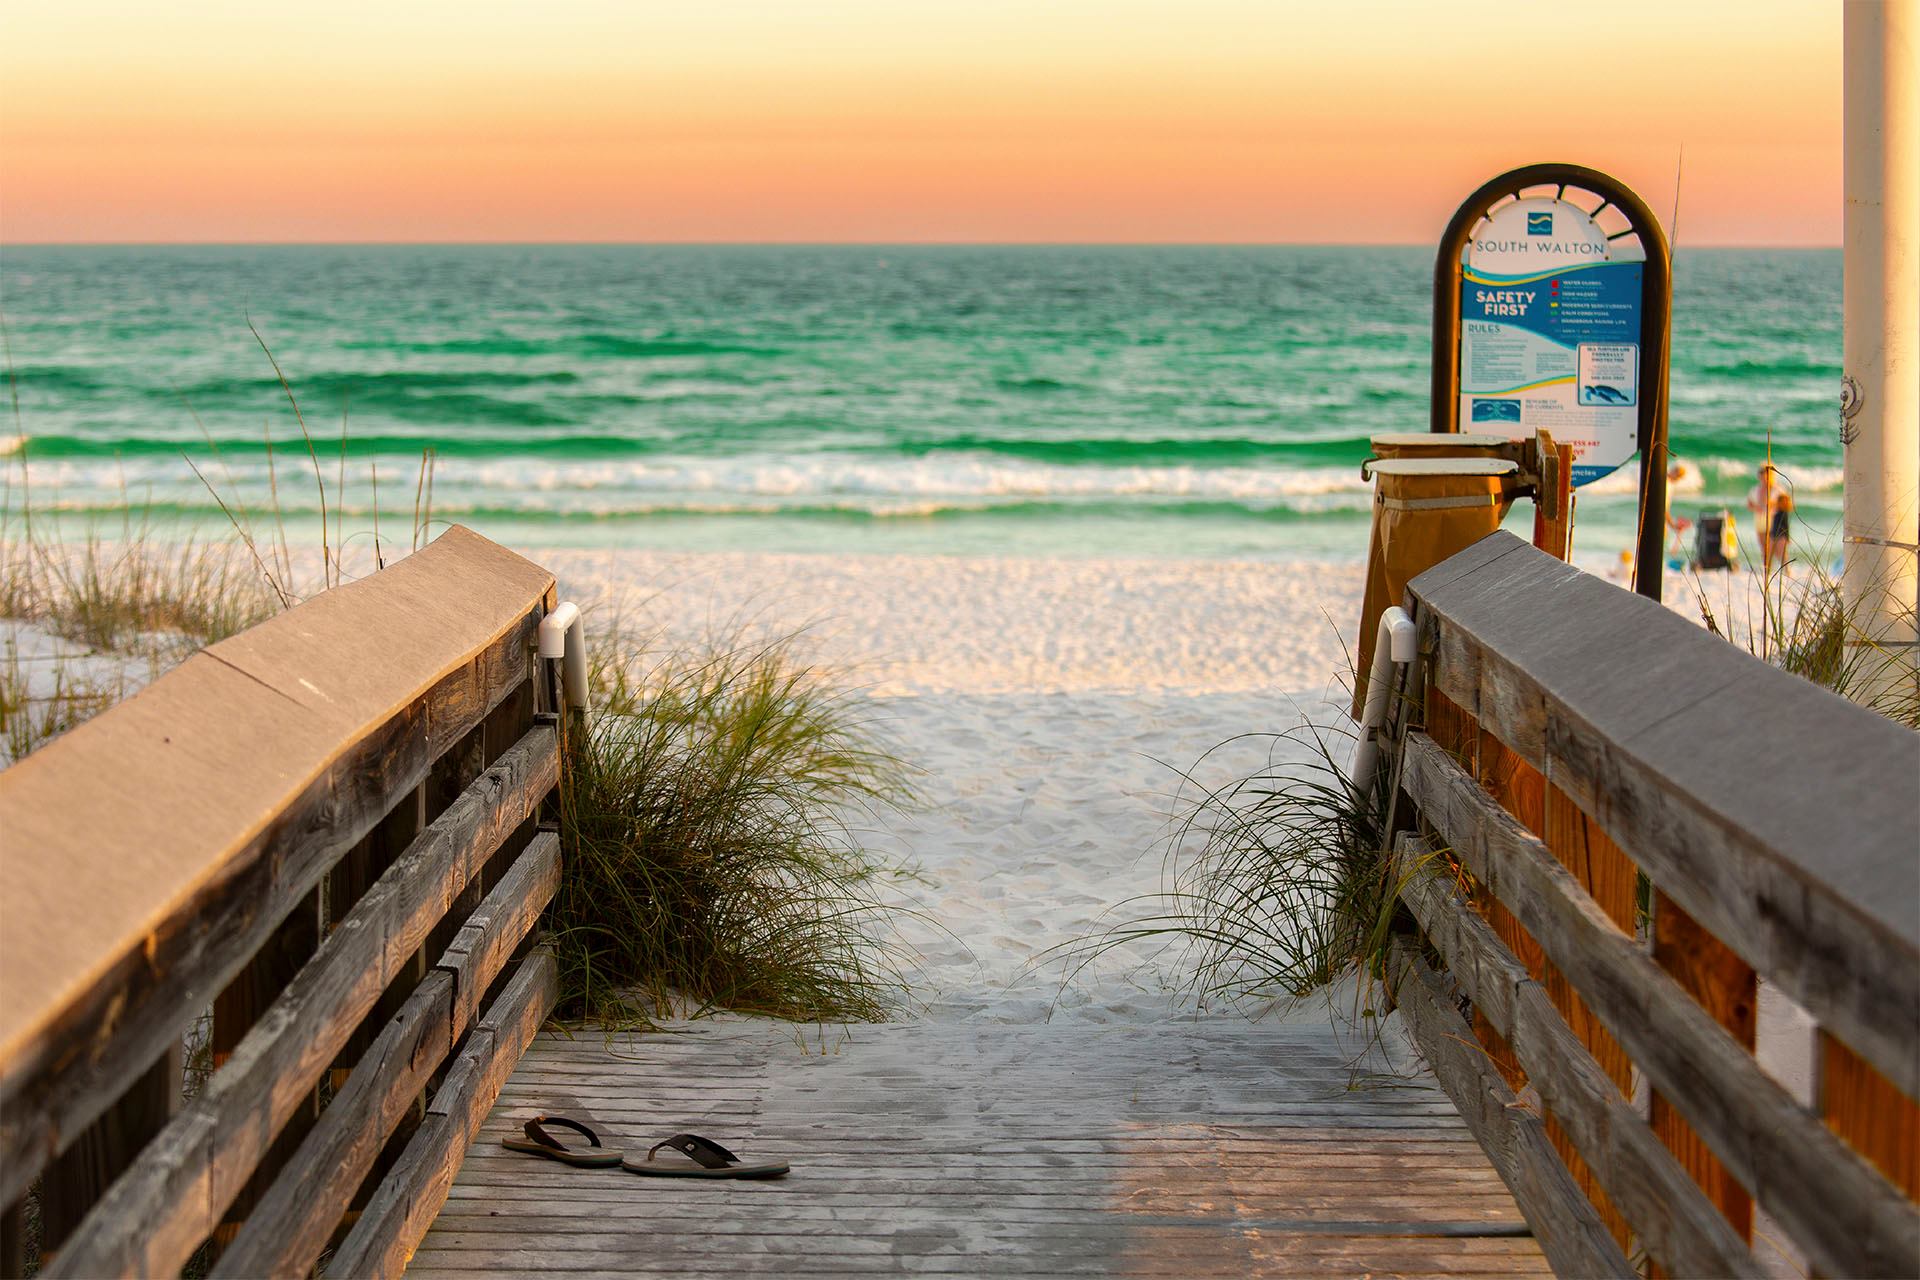 Things to do in Beaches of South Walton & Scenic 30A Florida